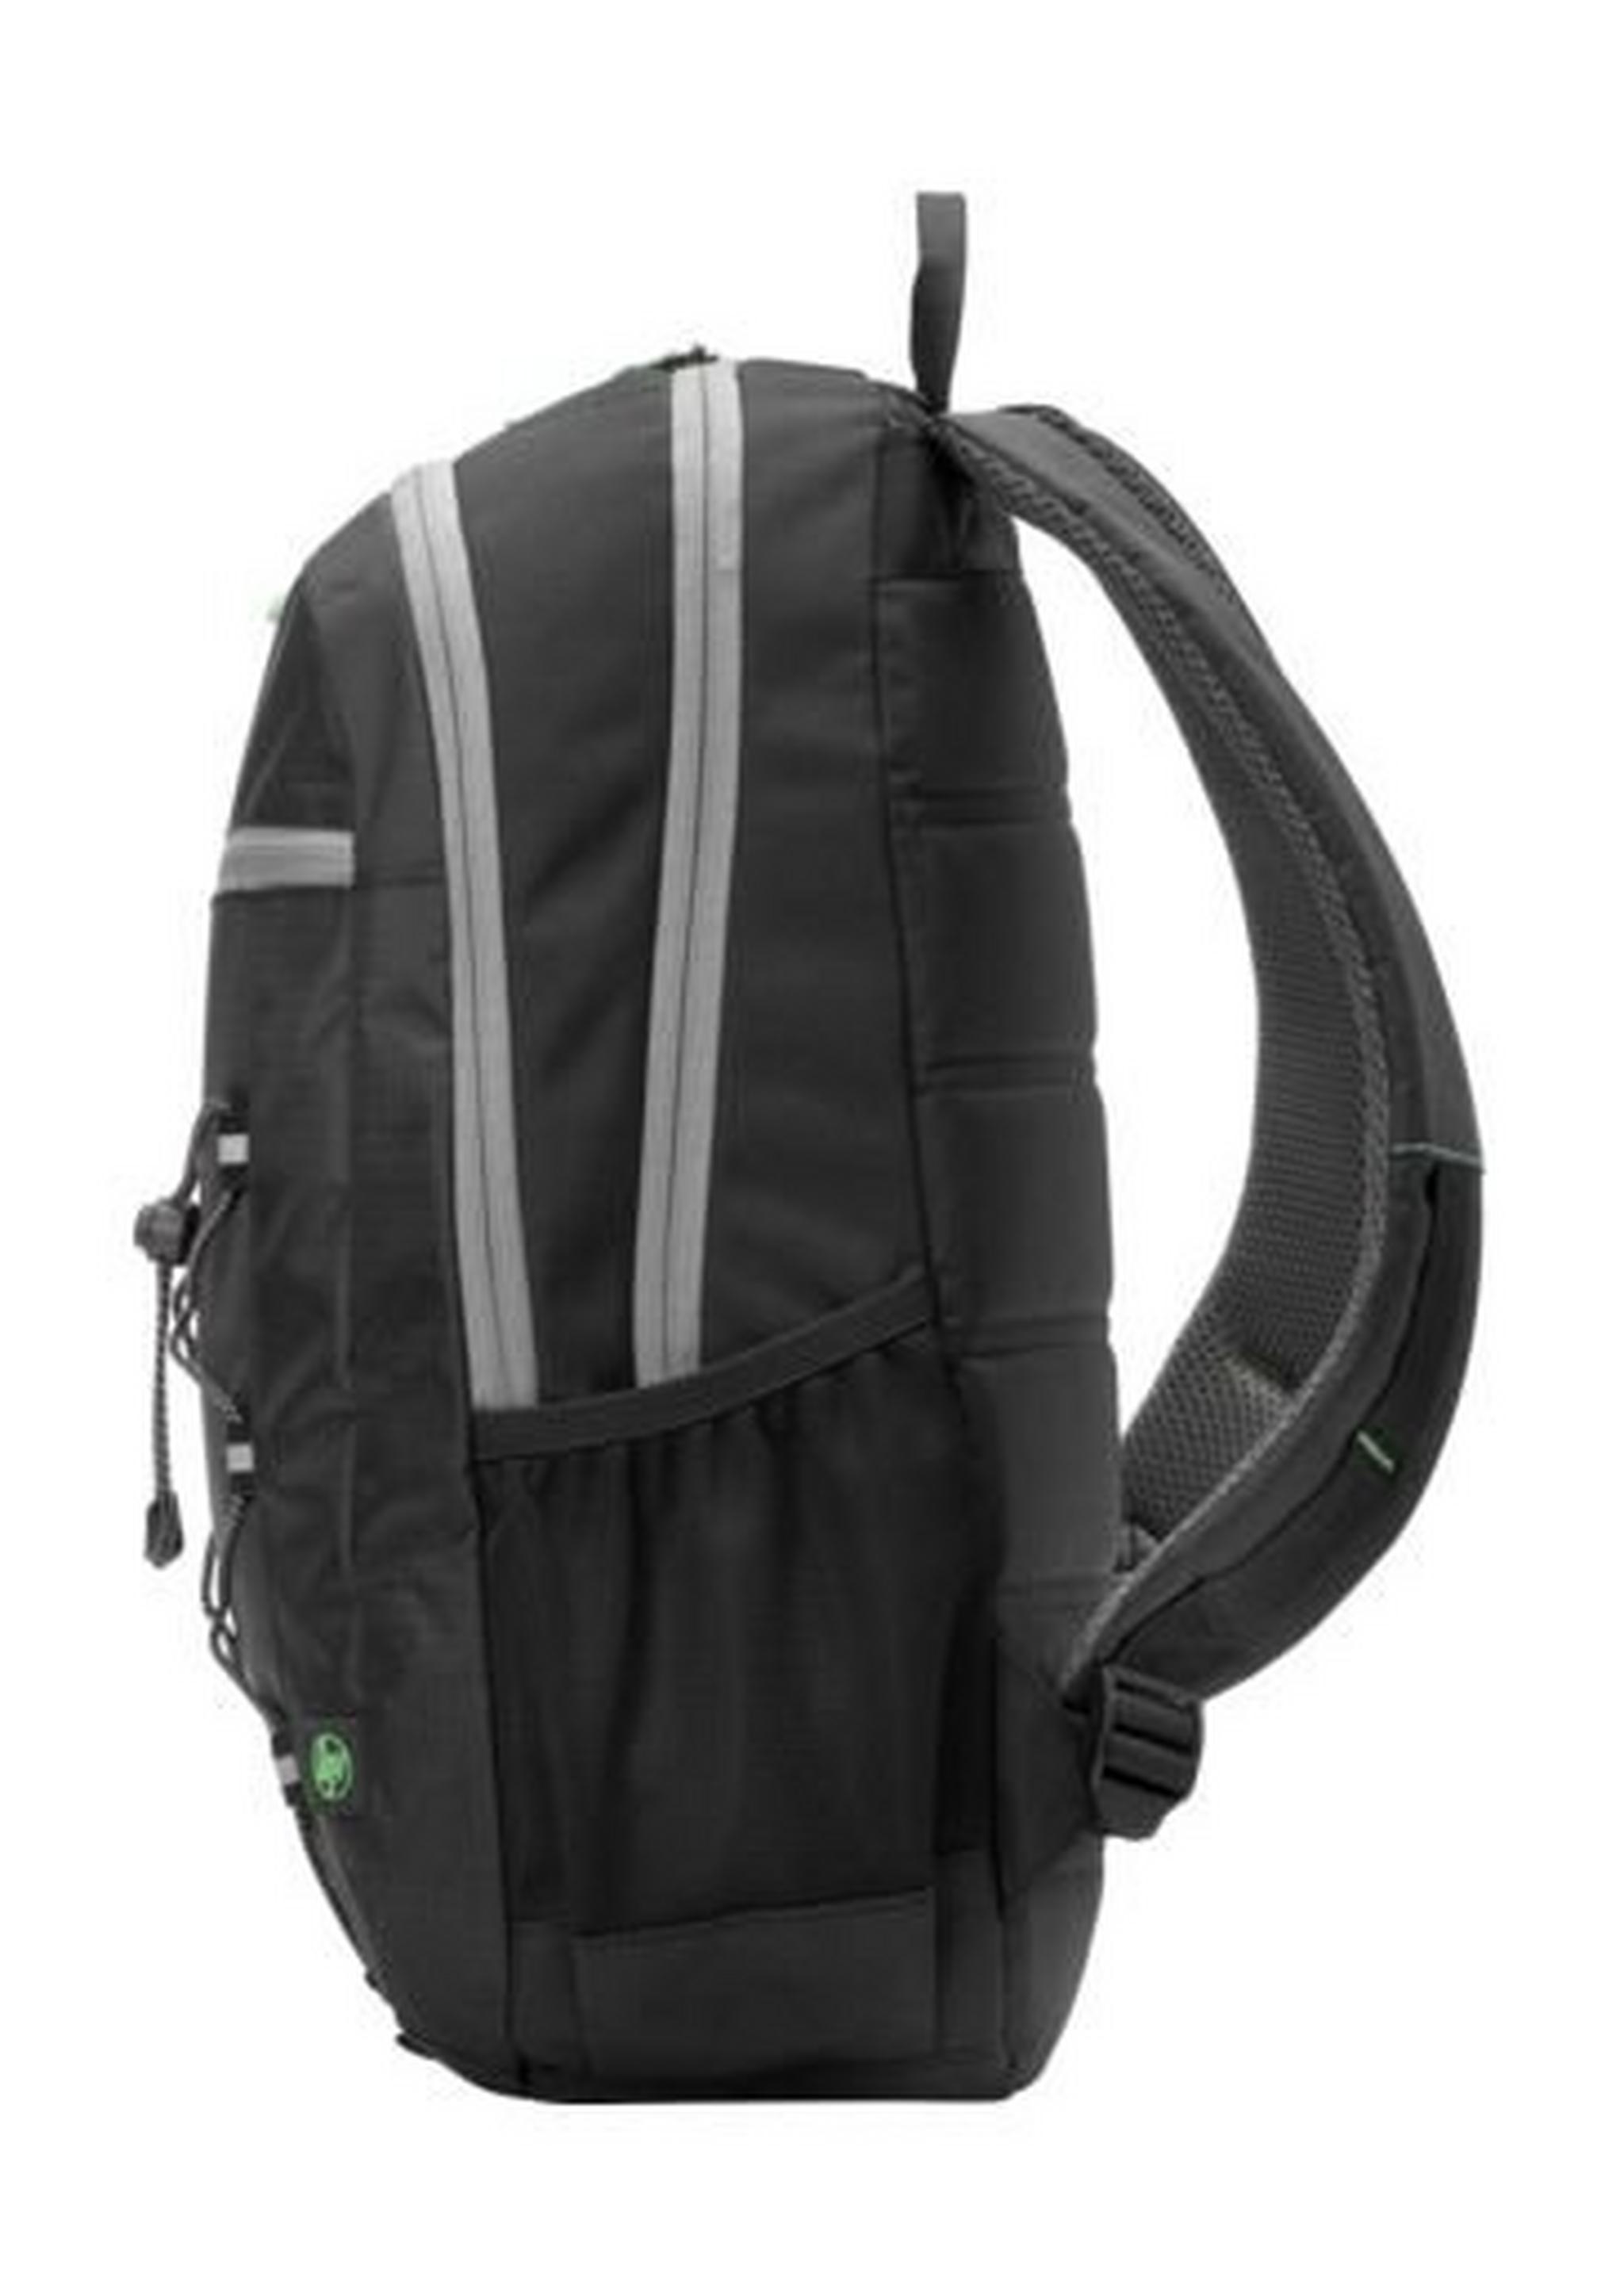 HP Active Backpack For 15.6 inch Laptop - Black